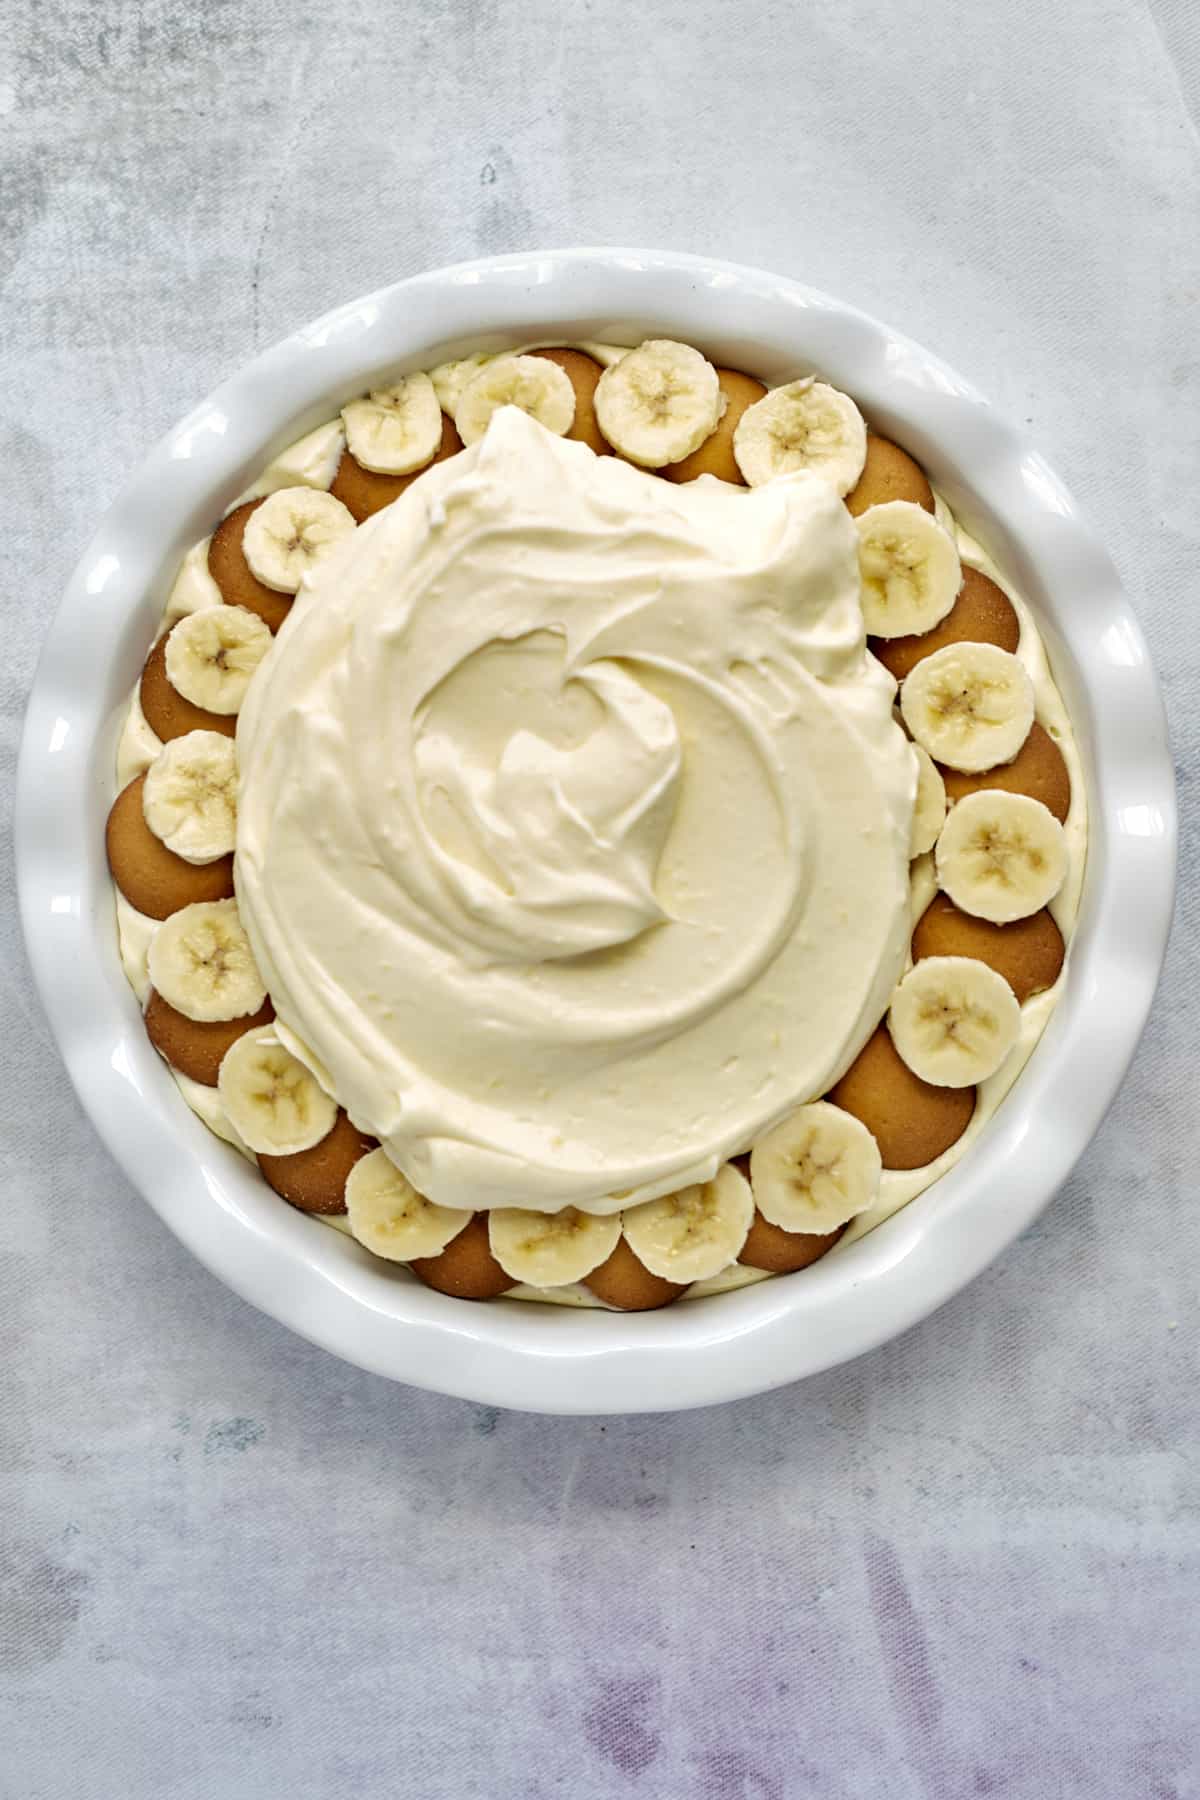 second layer of vanilla pudding over Nilla wafers and banana coins in a baking dish